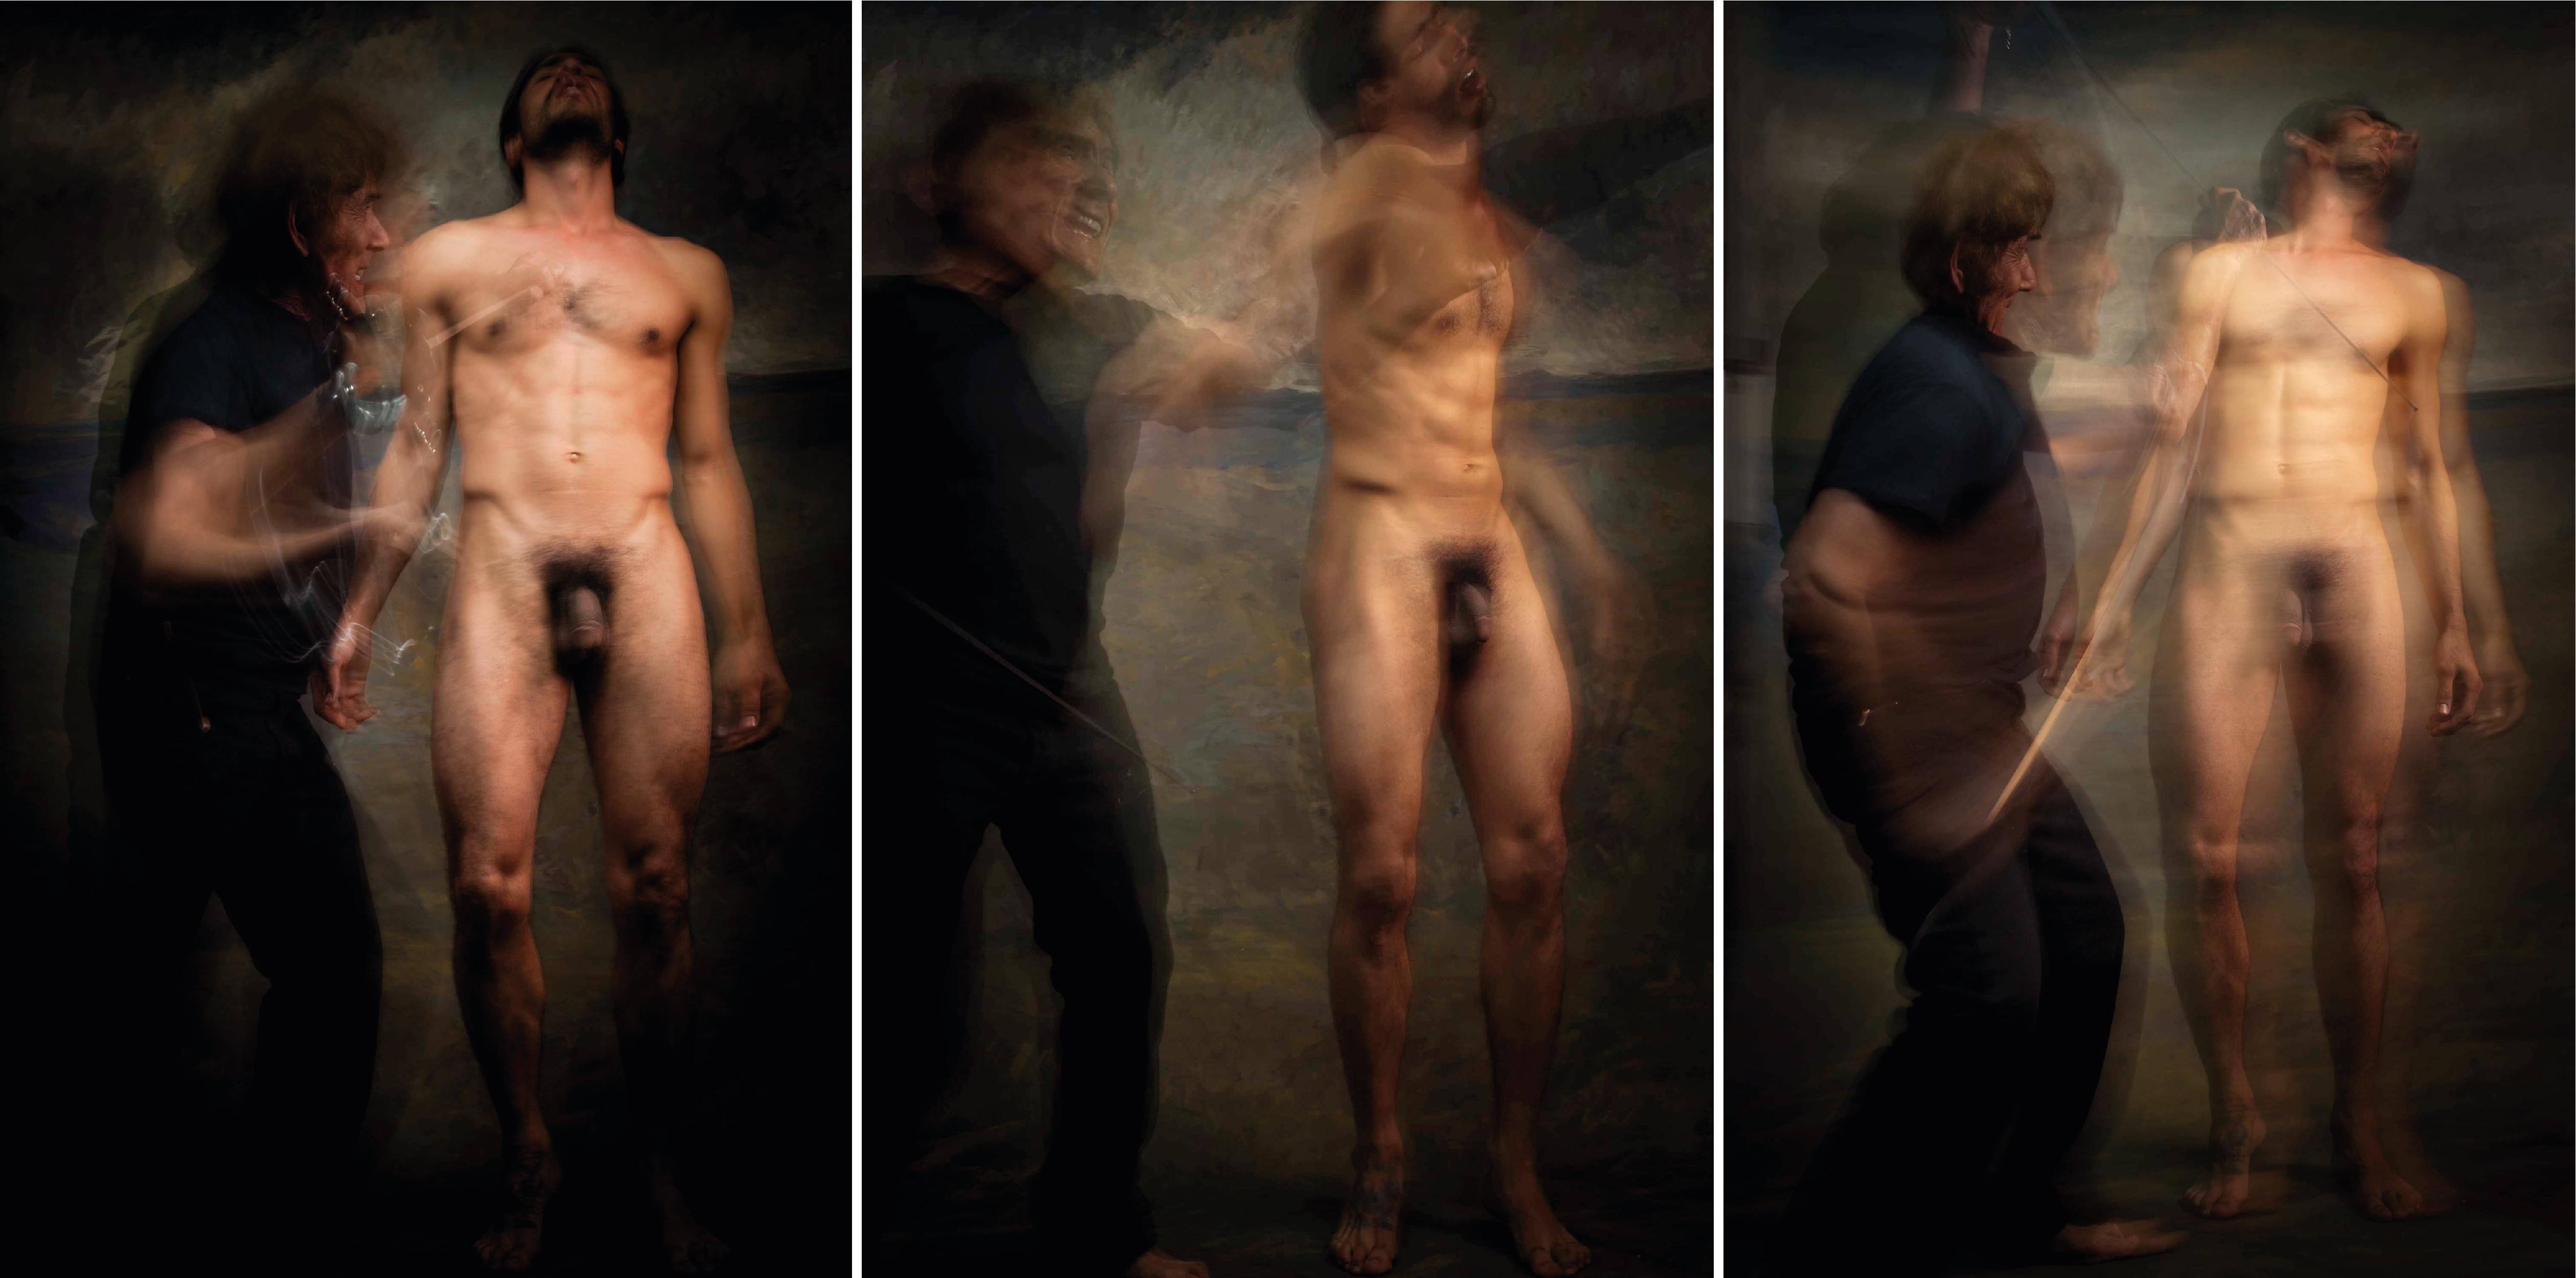 Mauricio Velez Color Photograph - Untitled X, XI and IX, From the Half Angels Half Demons series. Male Nude photo